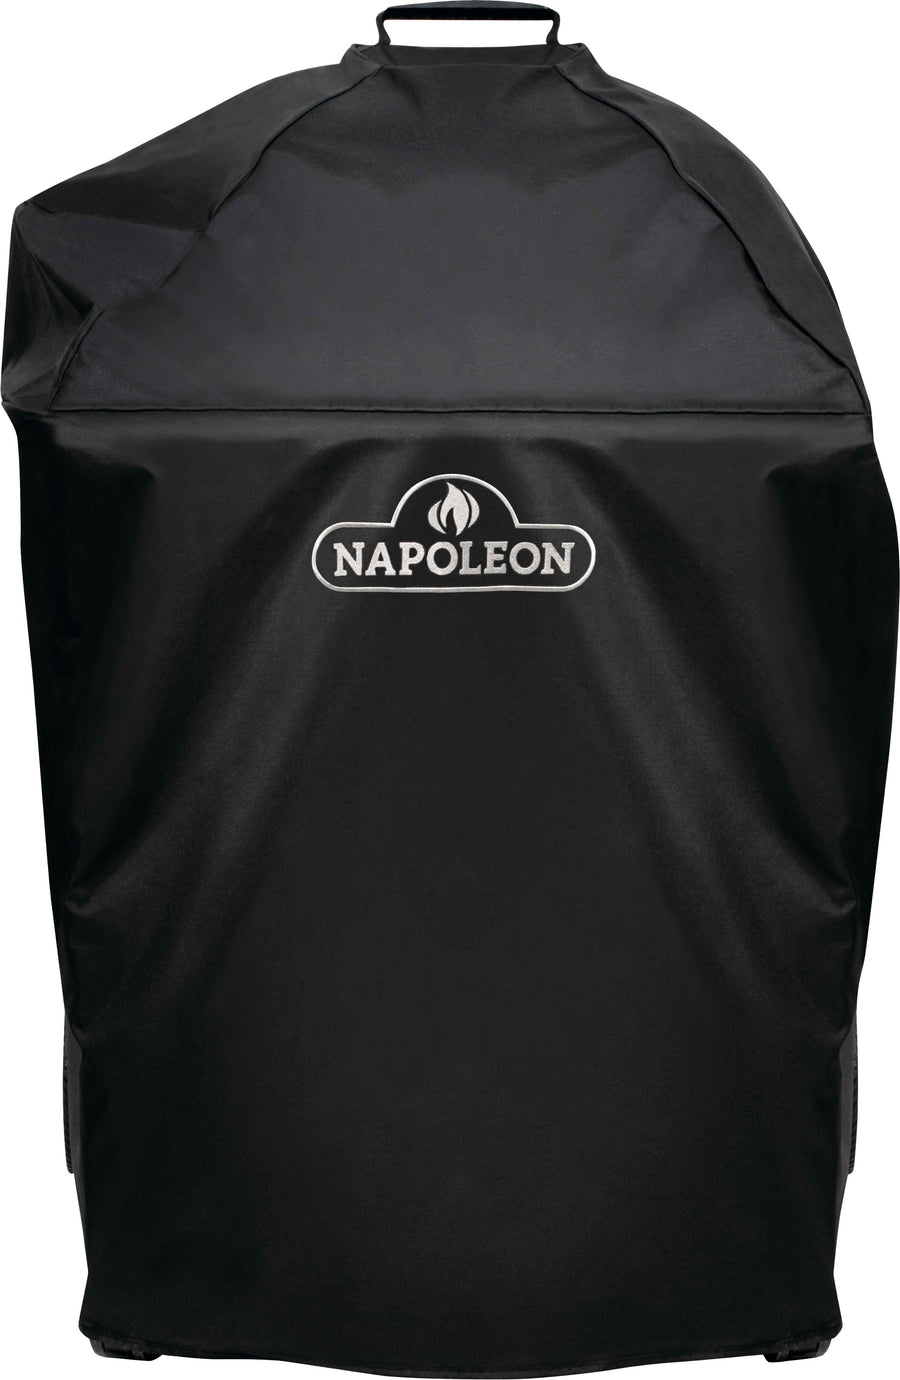 Napoleon - 22" Charcoal Kettle Grill with Cart Premium Cover - Black_0